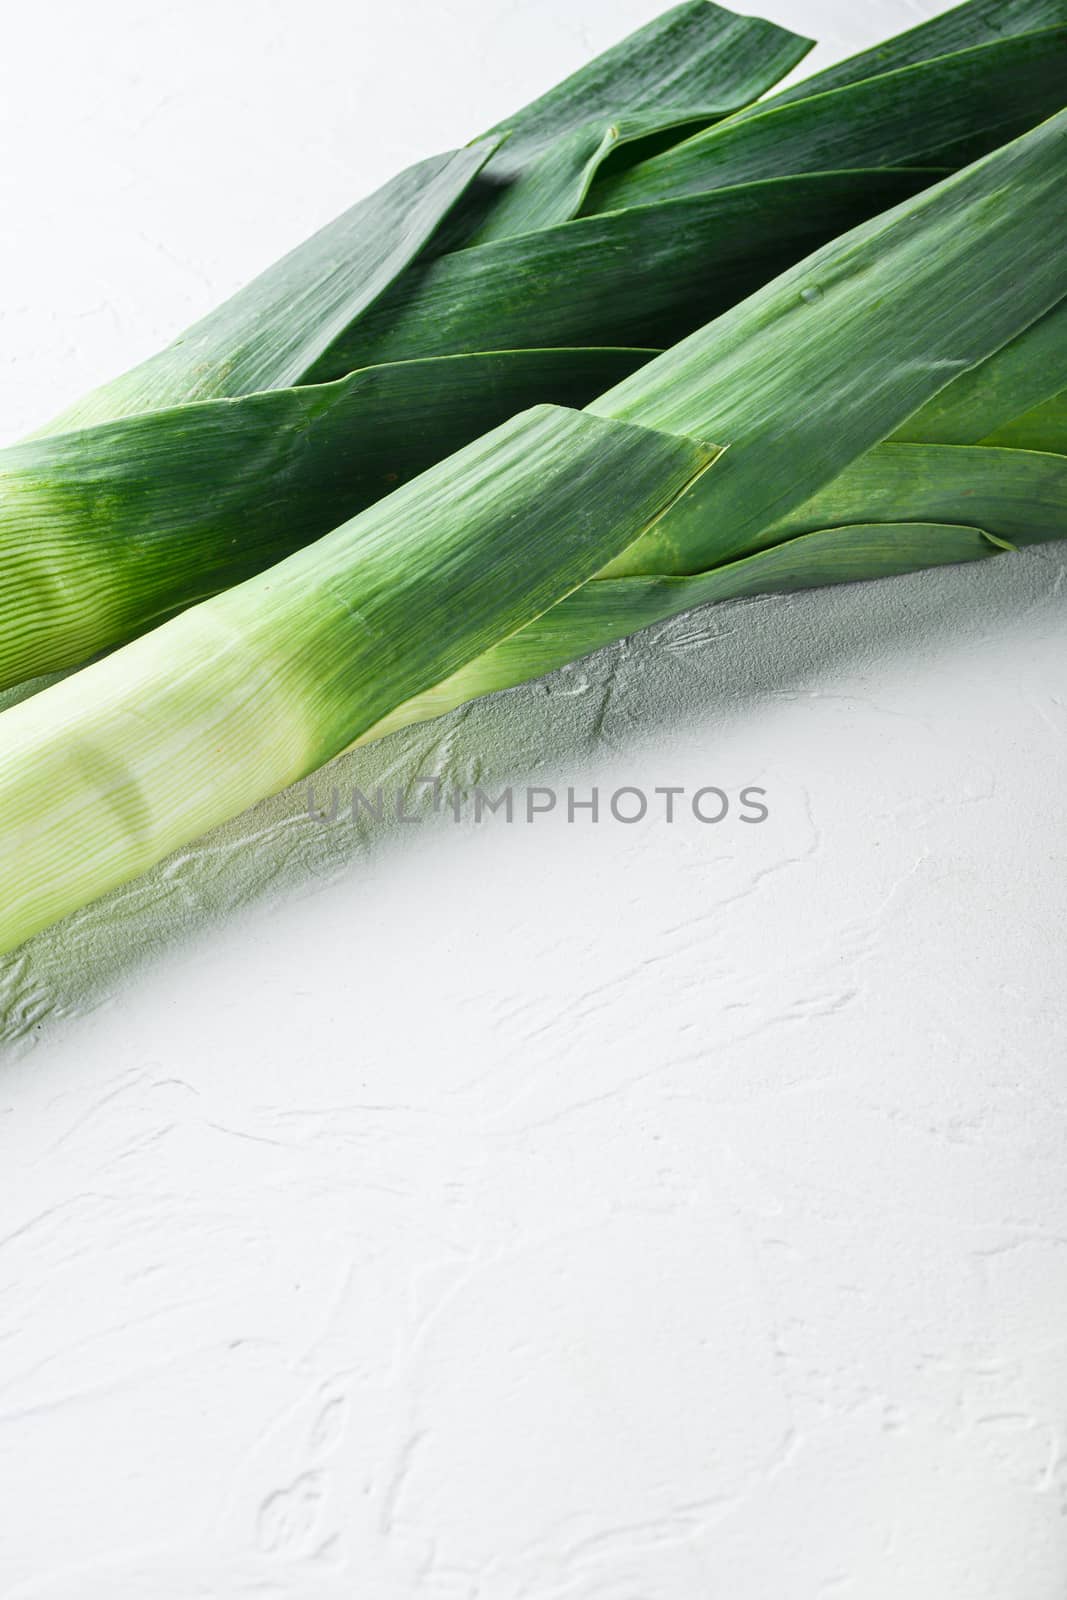 Organic Leek onion Stalks on white background, side view, selective focus space for text. by Ilianesolenyi